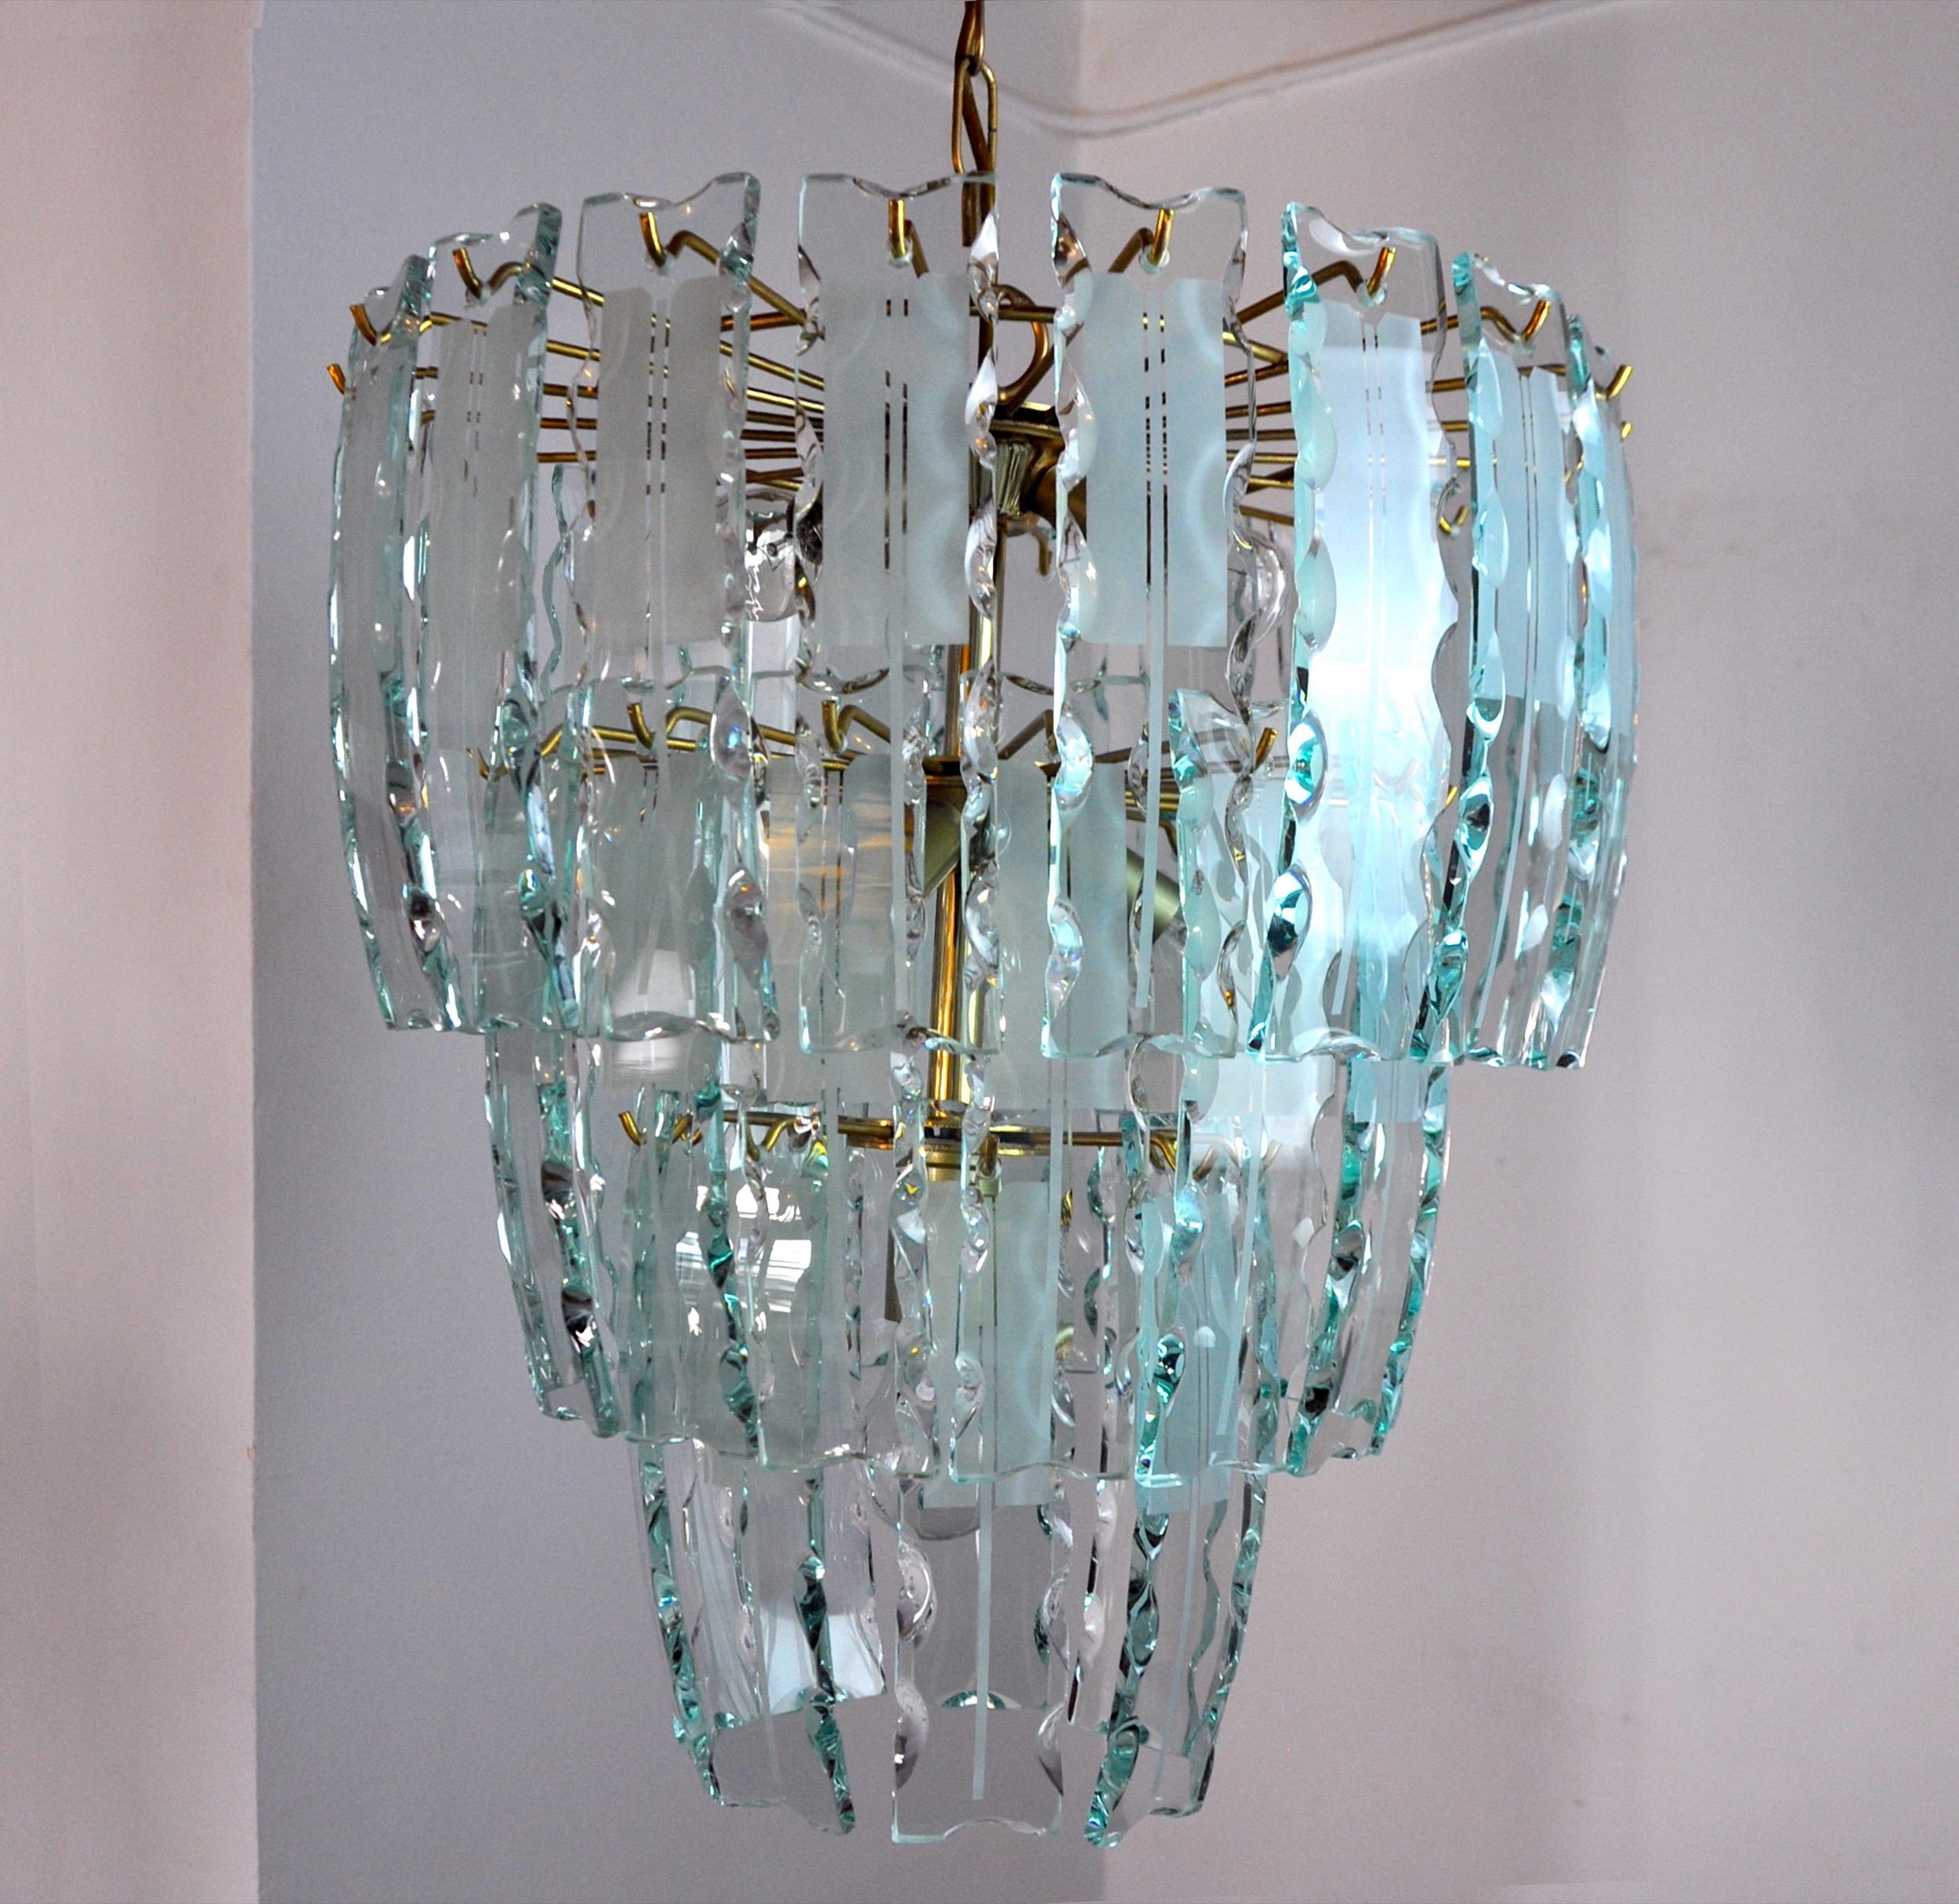 Hollywood Regency Chandelier Zero Quattro, 3 Levels, Murano Glass, Italy, 1970 For Sale